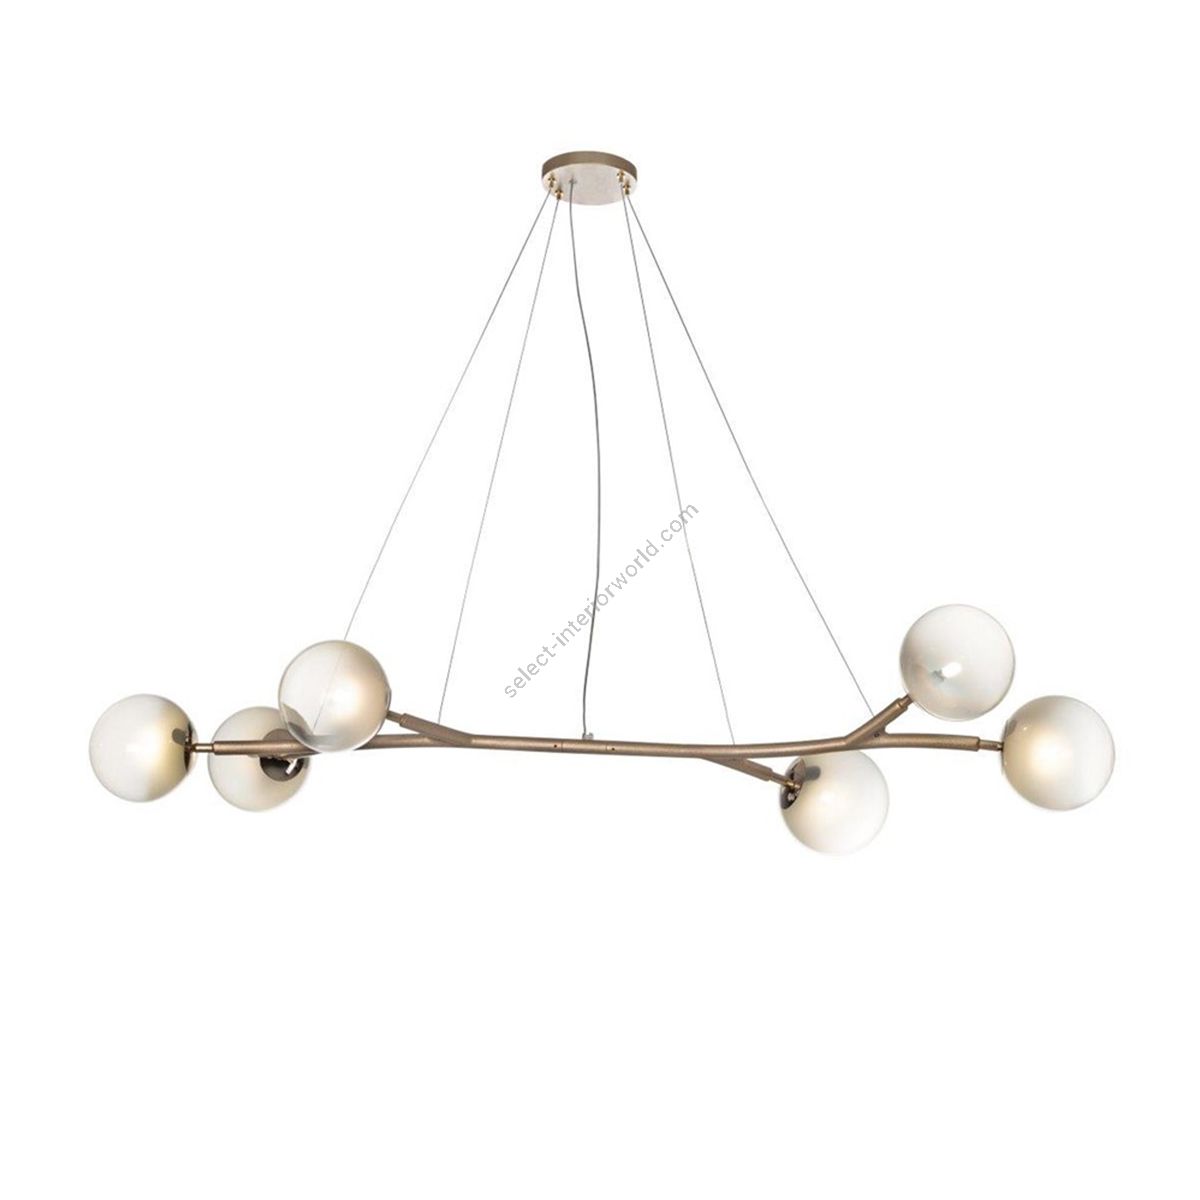 Il Paralume Marina / Chandelier 6-Lights, Modern style / Buds 2248/CH6